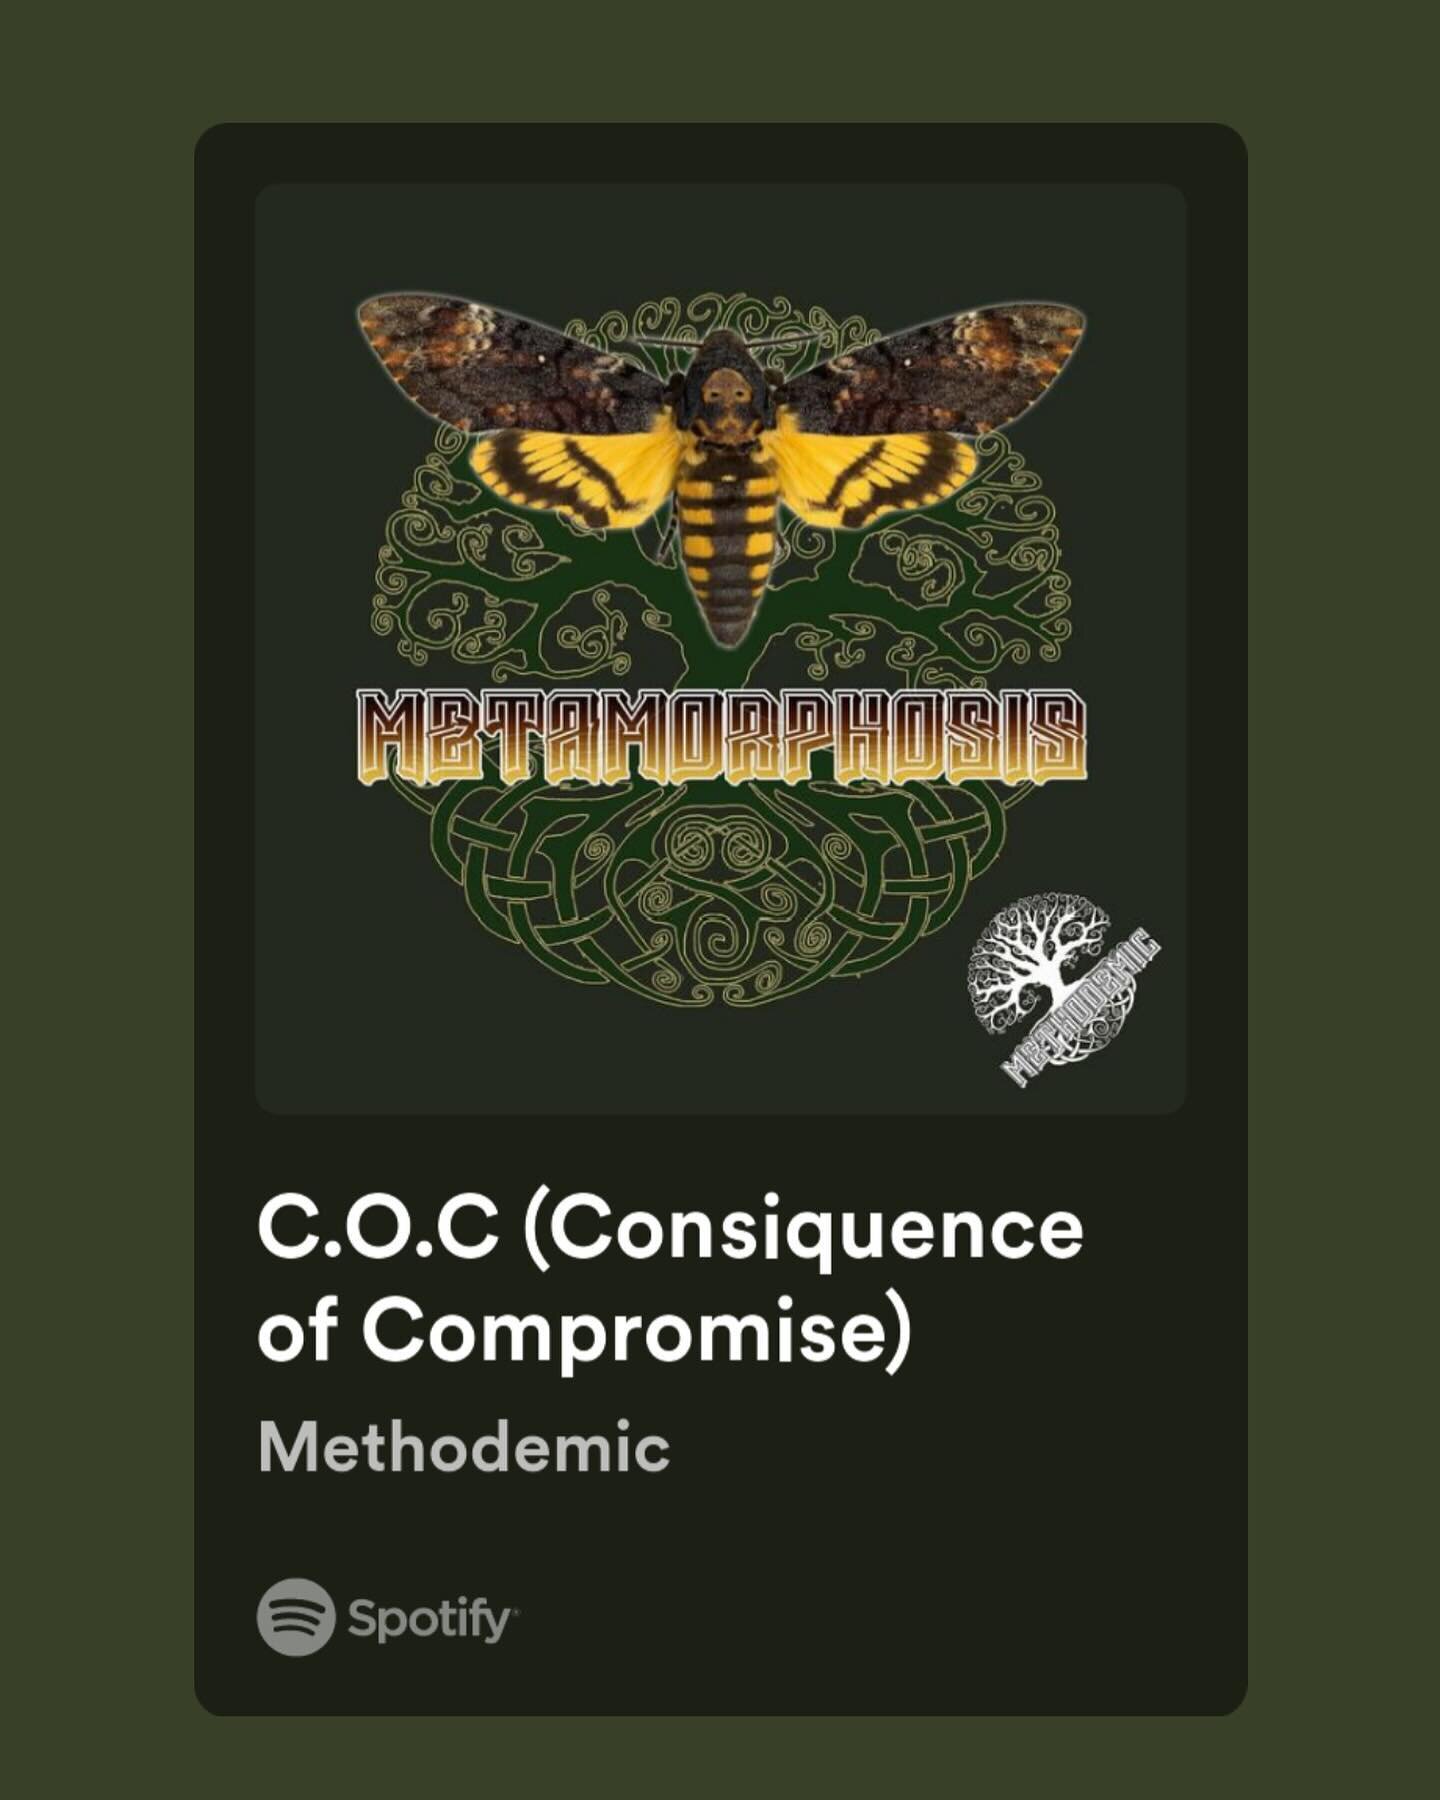 The day has finally come. 
We are proud to release our first single, Consiquence of compromise (or C.O.C for short)

We would like to give a massive thank you to Josh @splinterstudios for recording, mixing, mastering and putting up with us during the